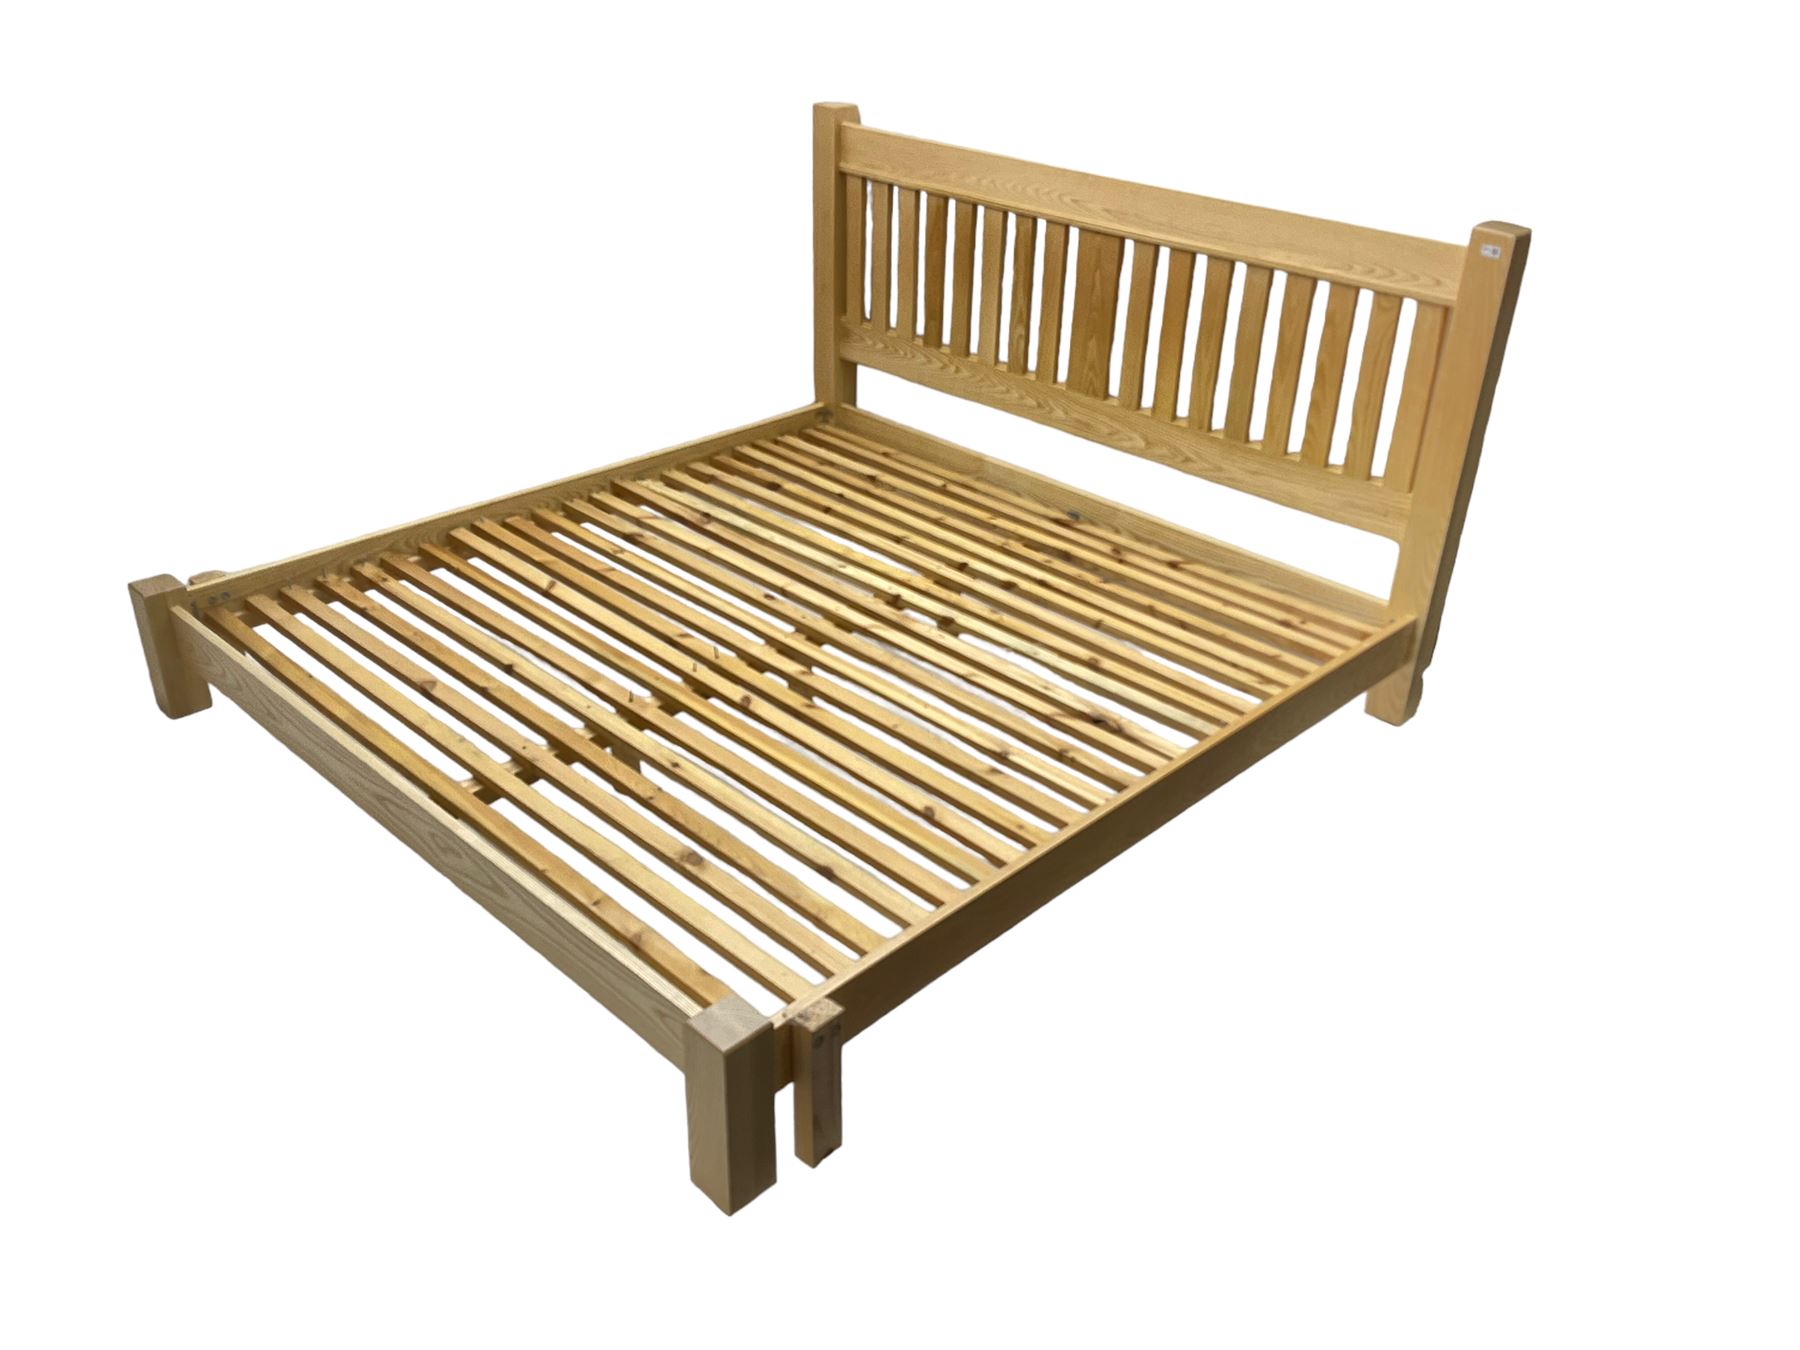 Light ash framed double bedstead (without mattress) - Image 3 of 4